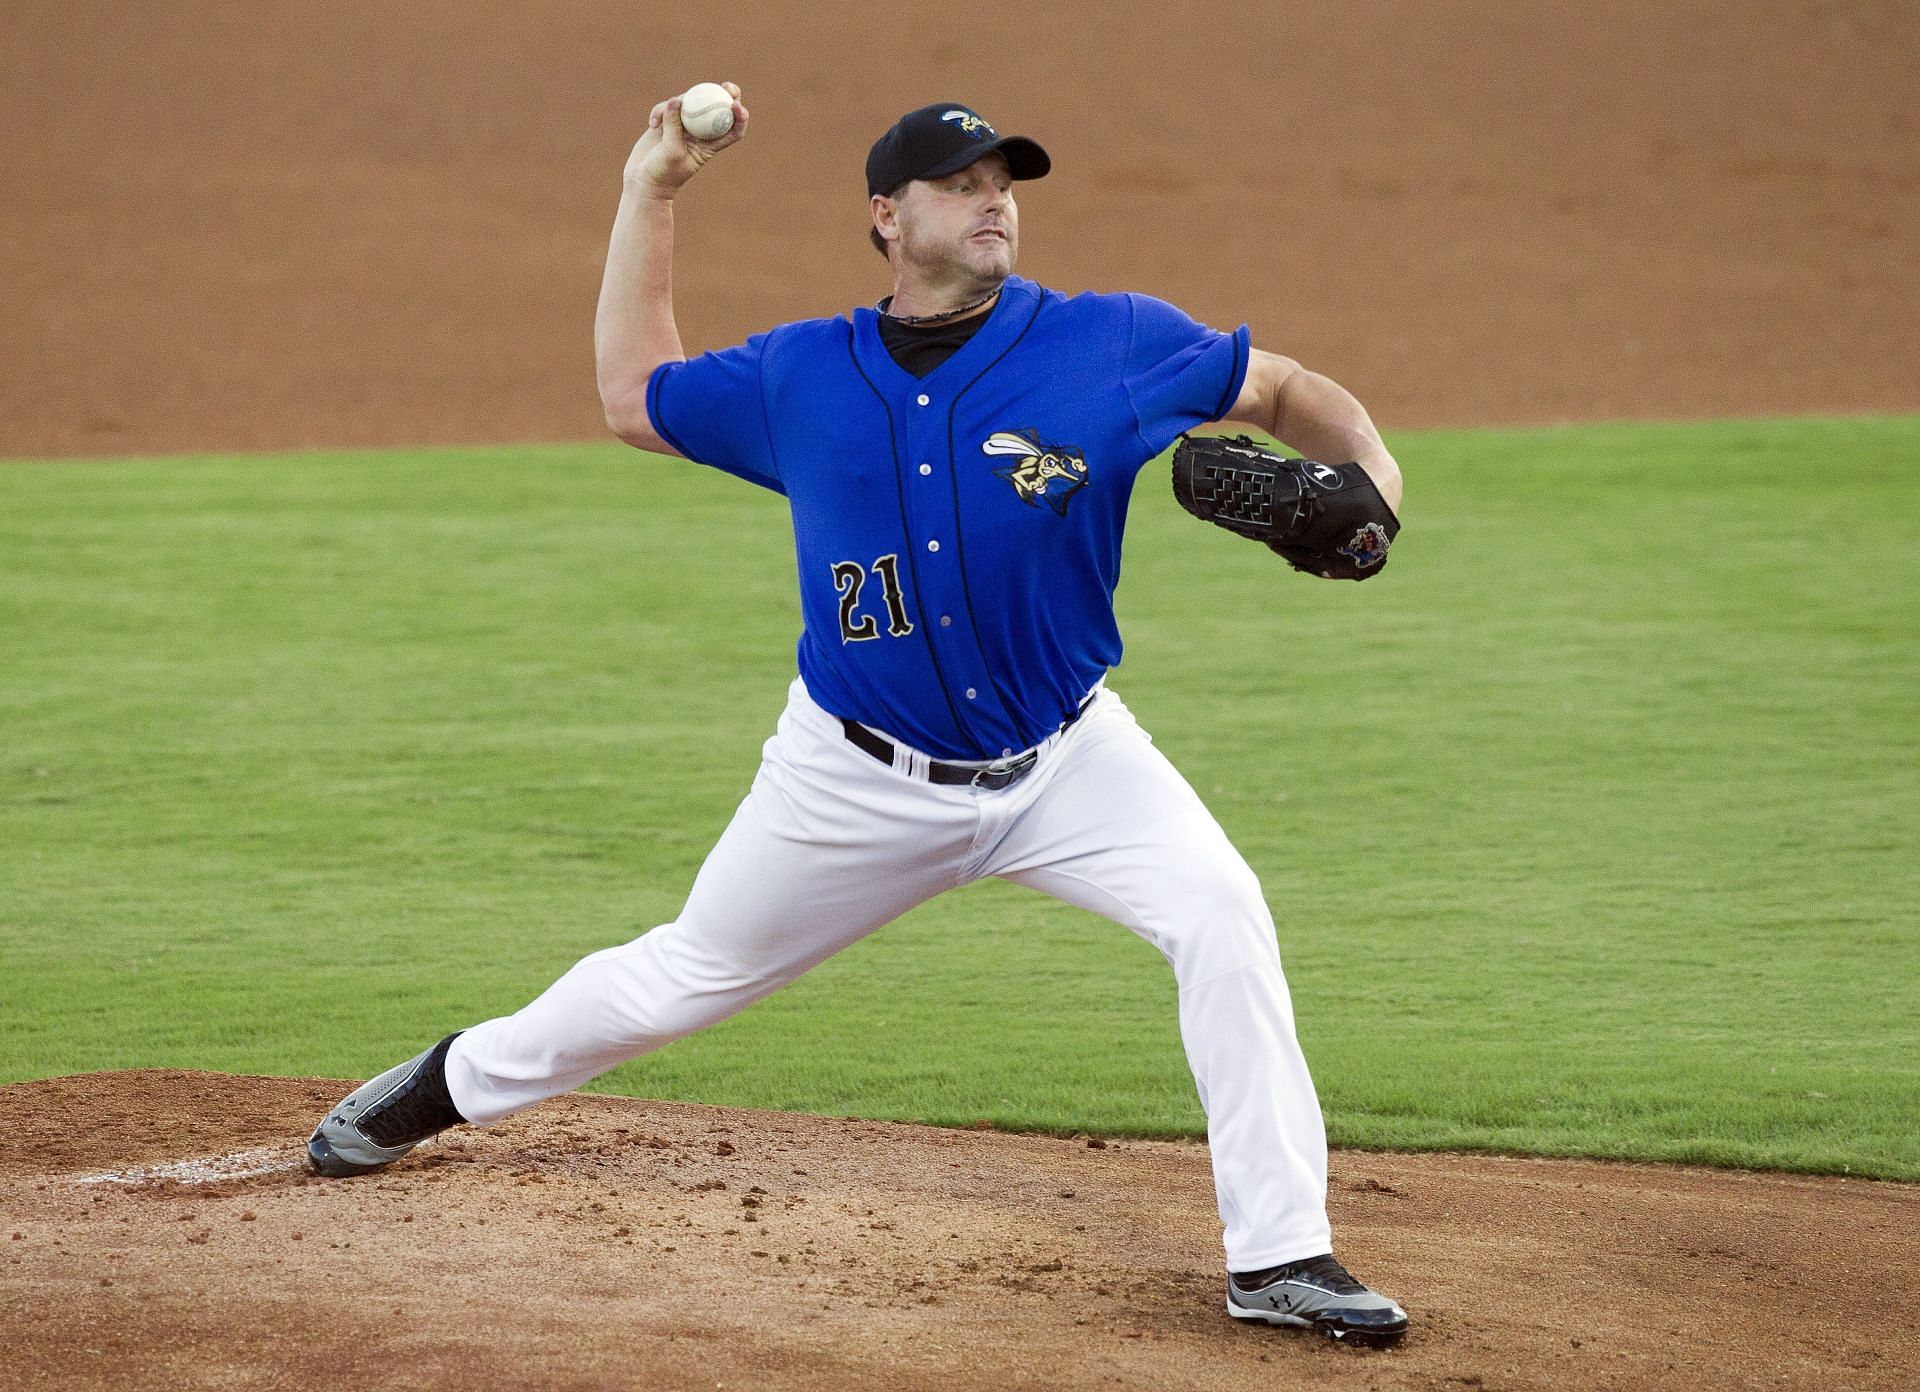 Roger Clemens pitching in the minor leagues 2012